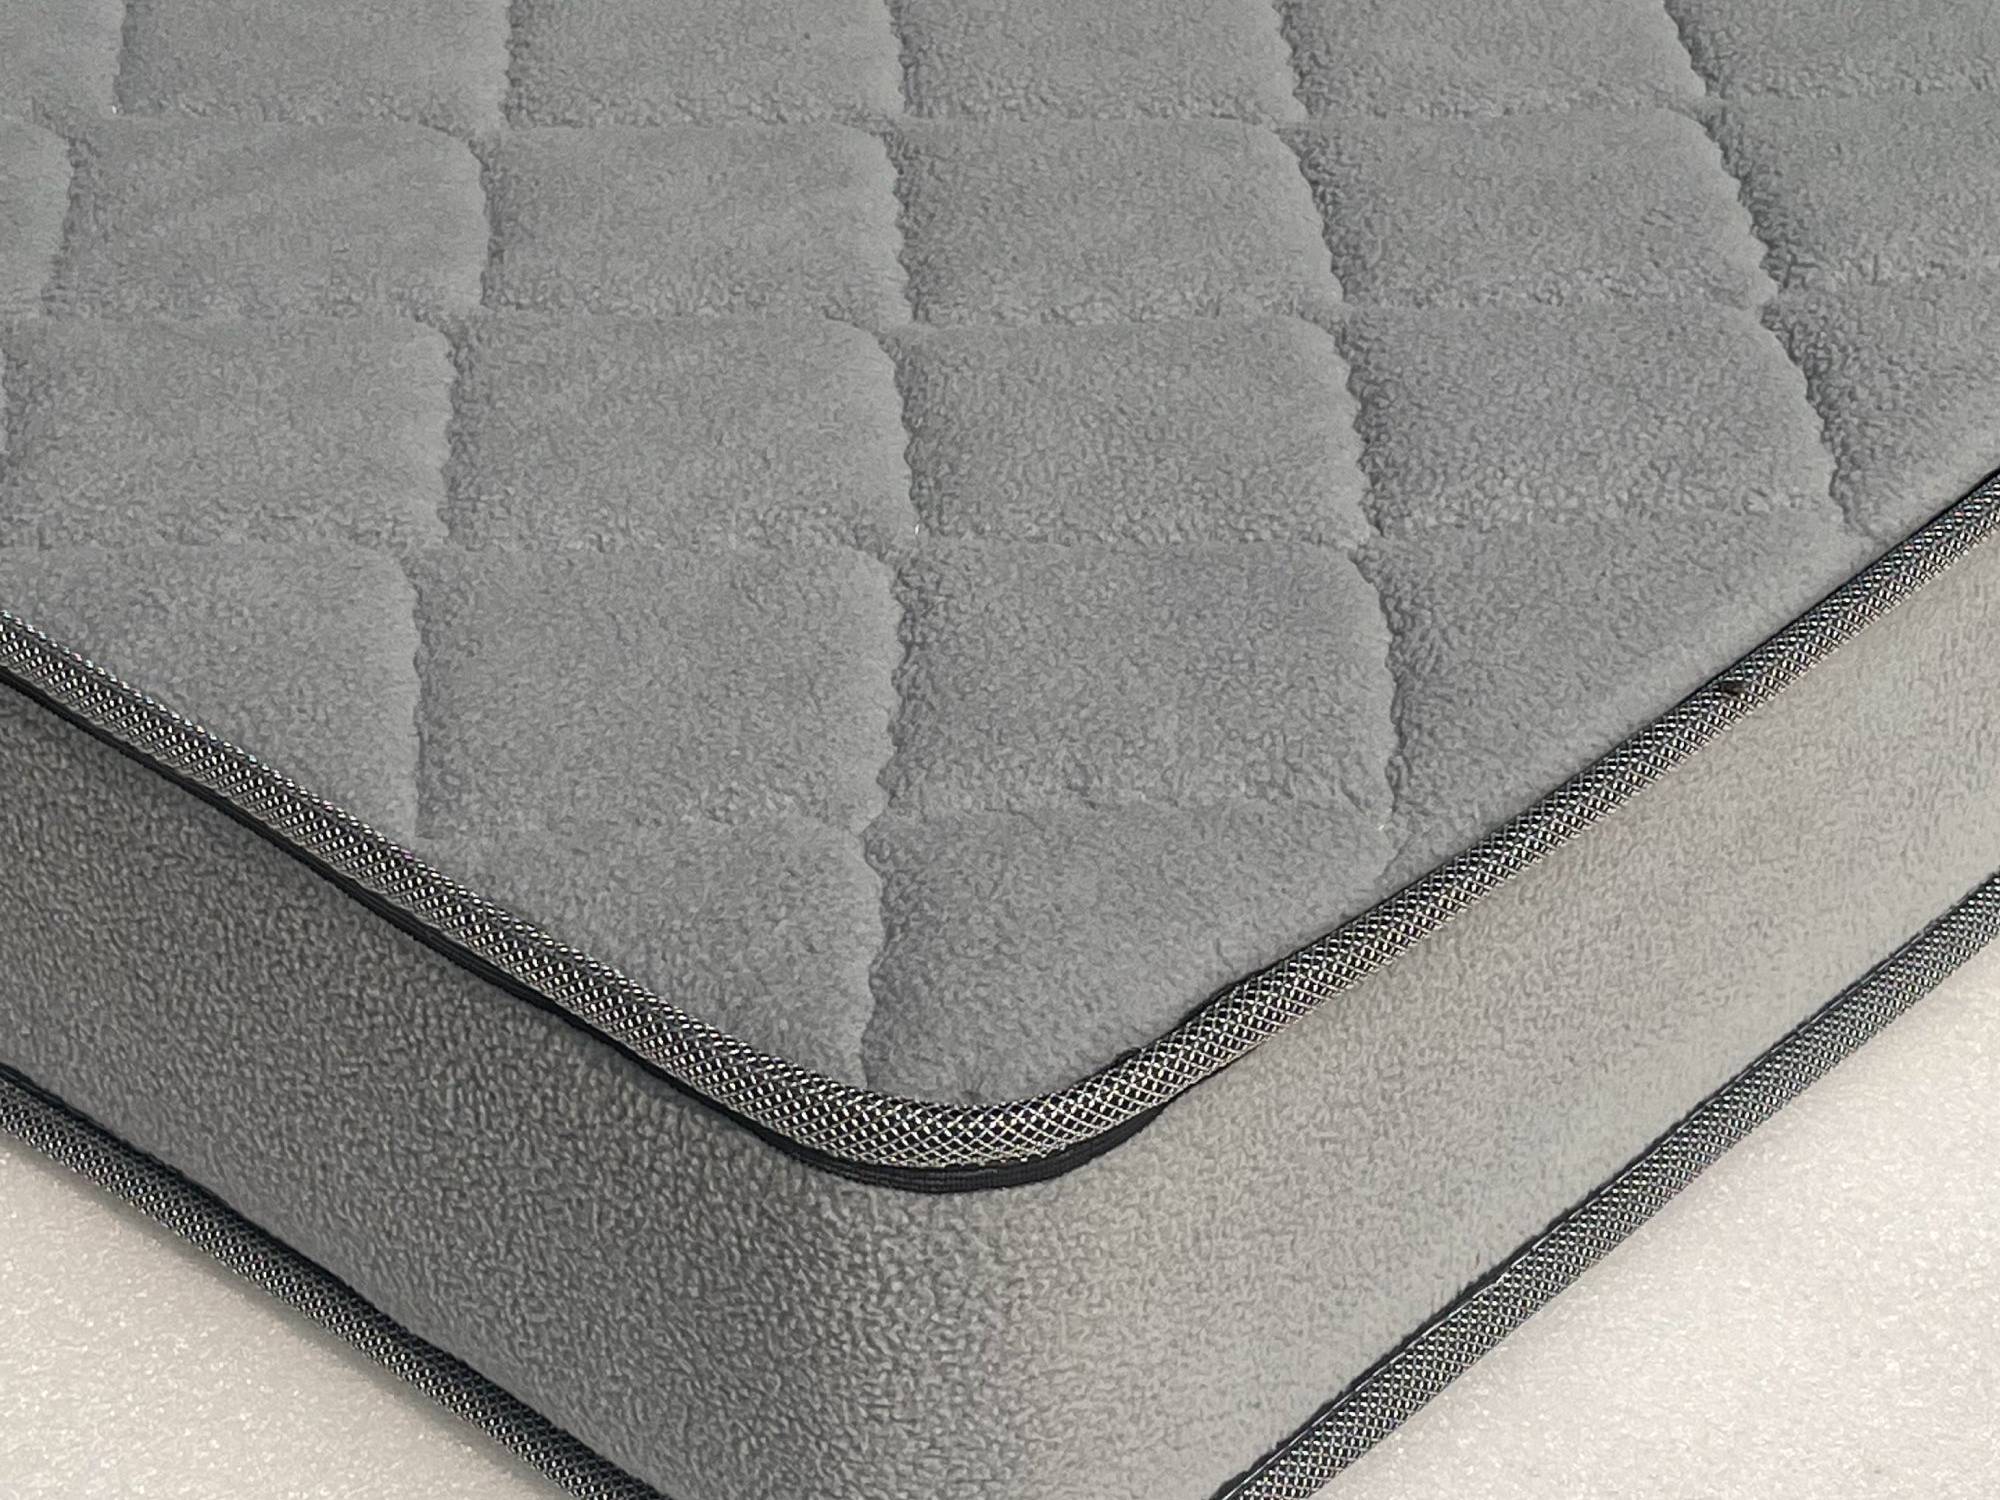 Finding the Best Mattress in Saudi Arabia for Your Ultimate Comfort